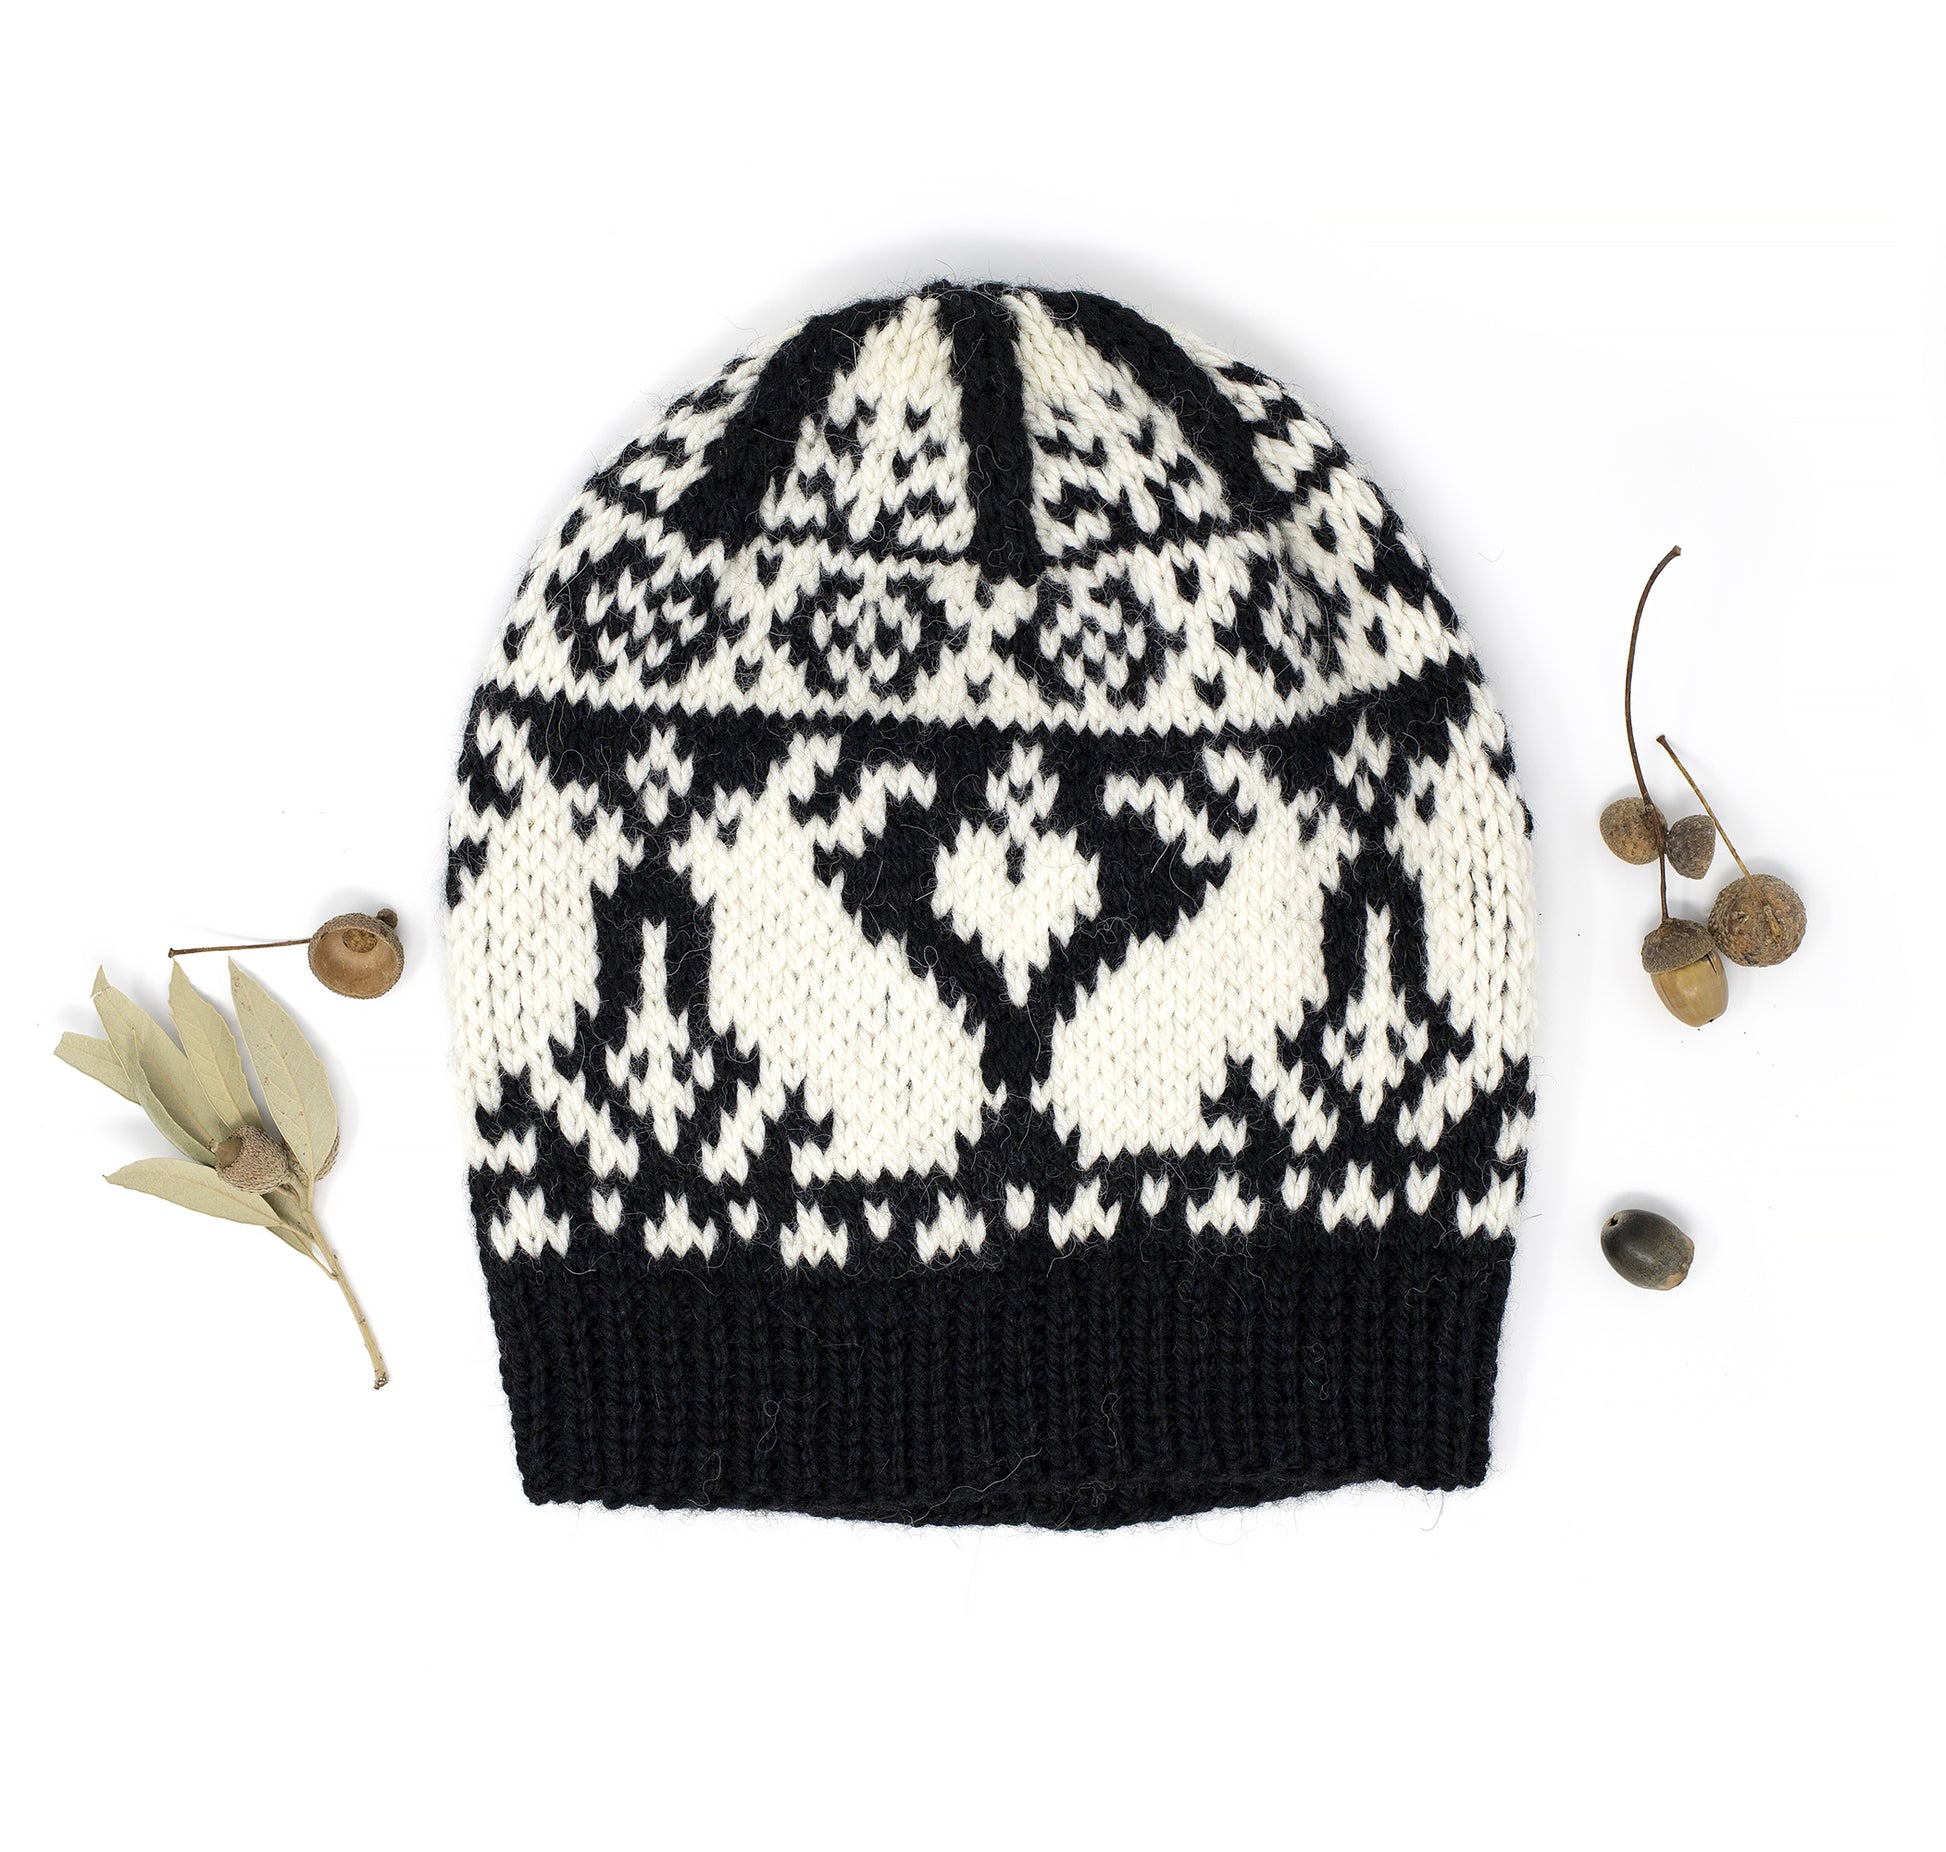 black and white wool hand-knitted Fair Isle beanie hat in Bunny Rabbit knitting pattern